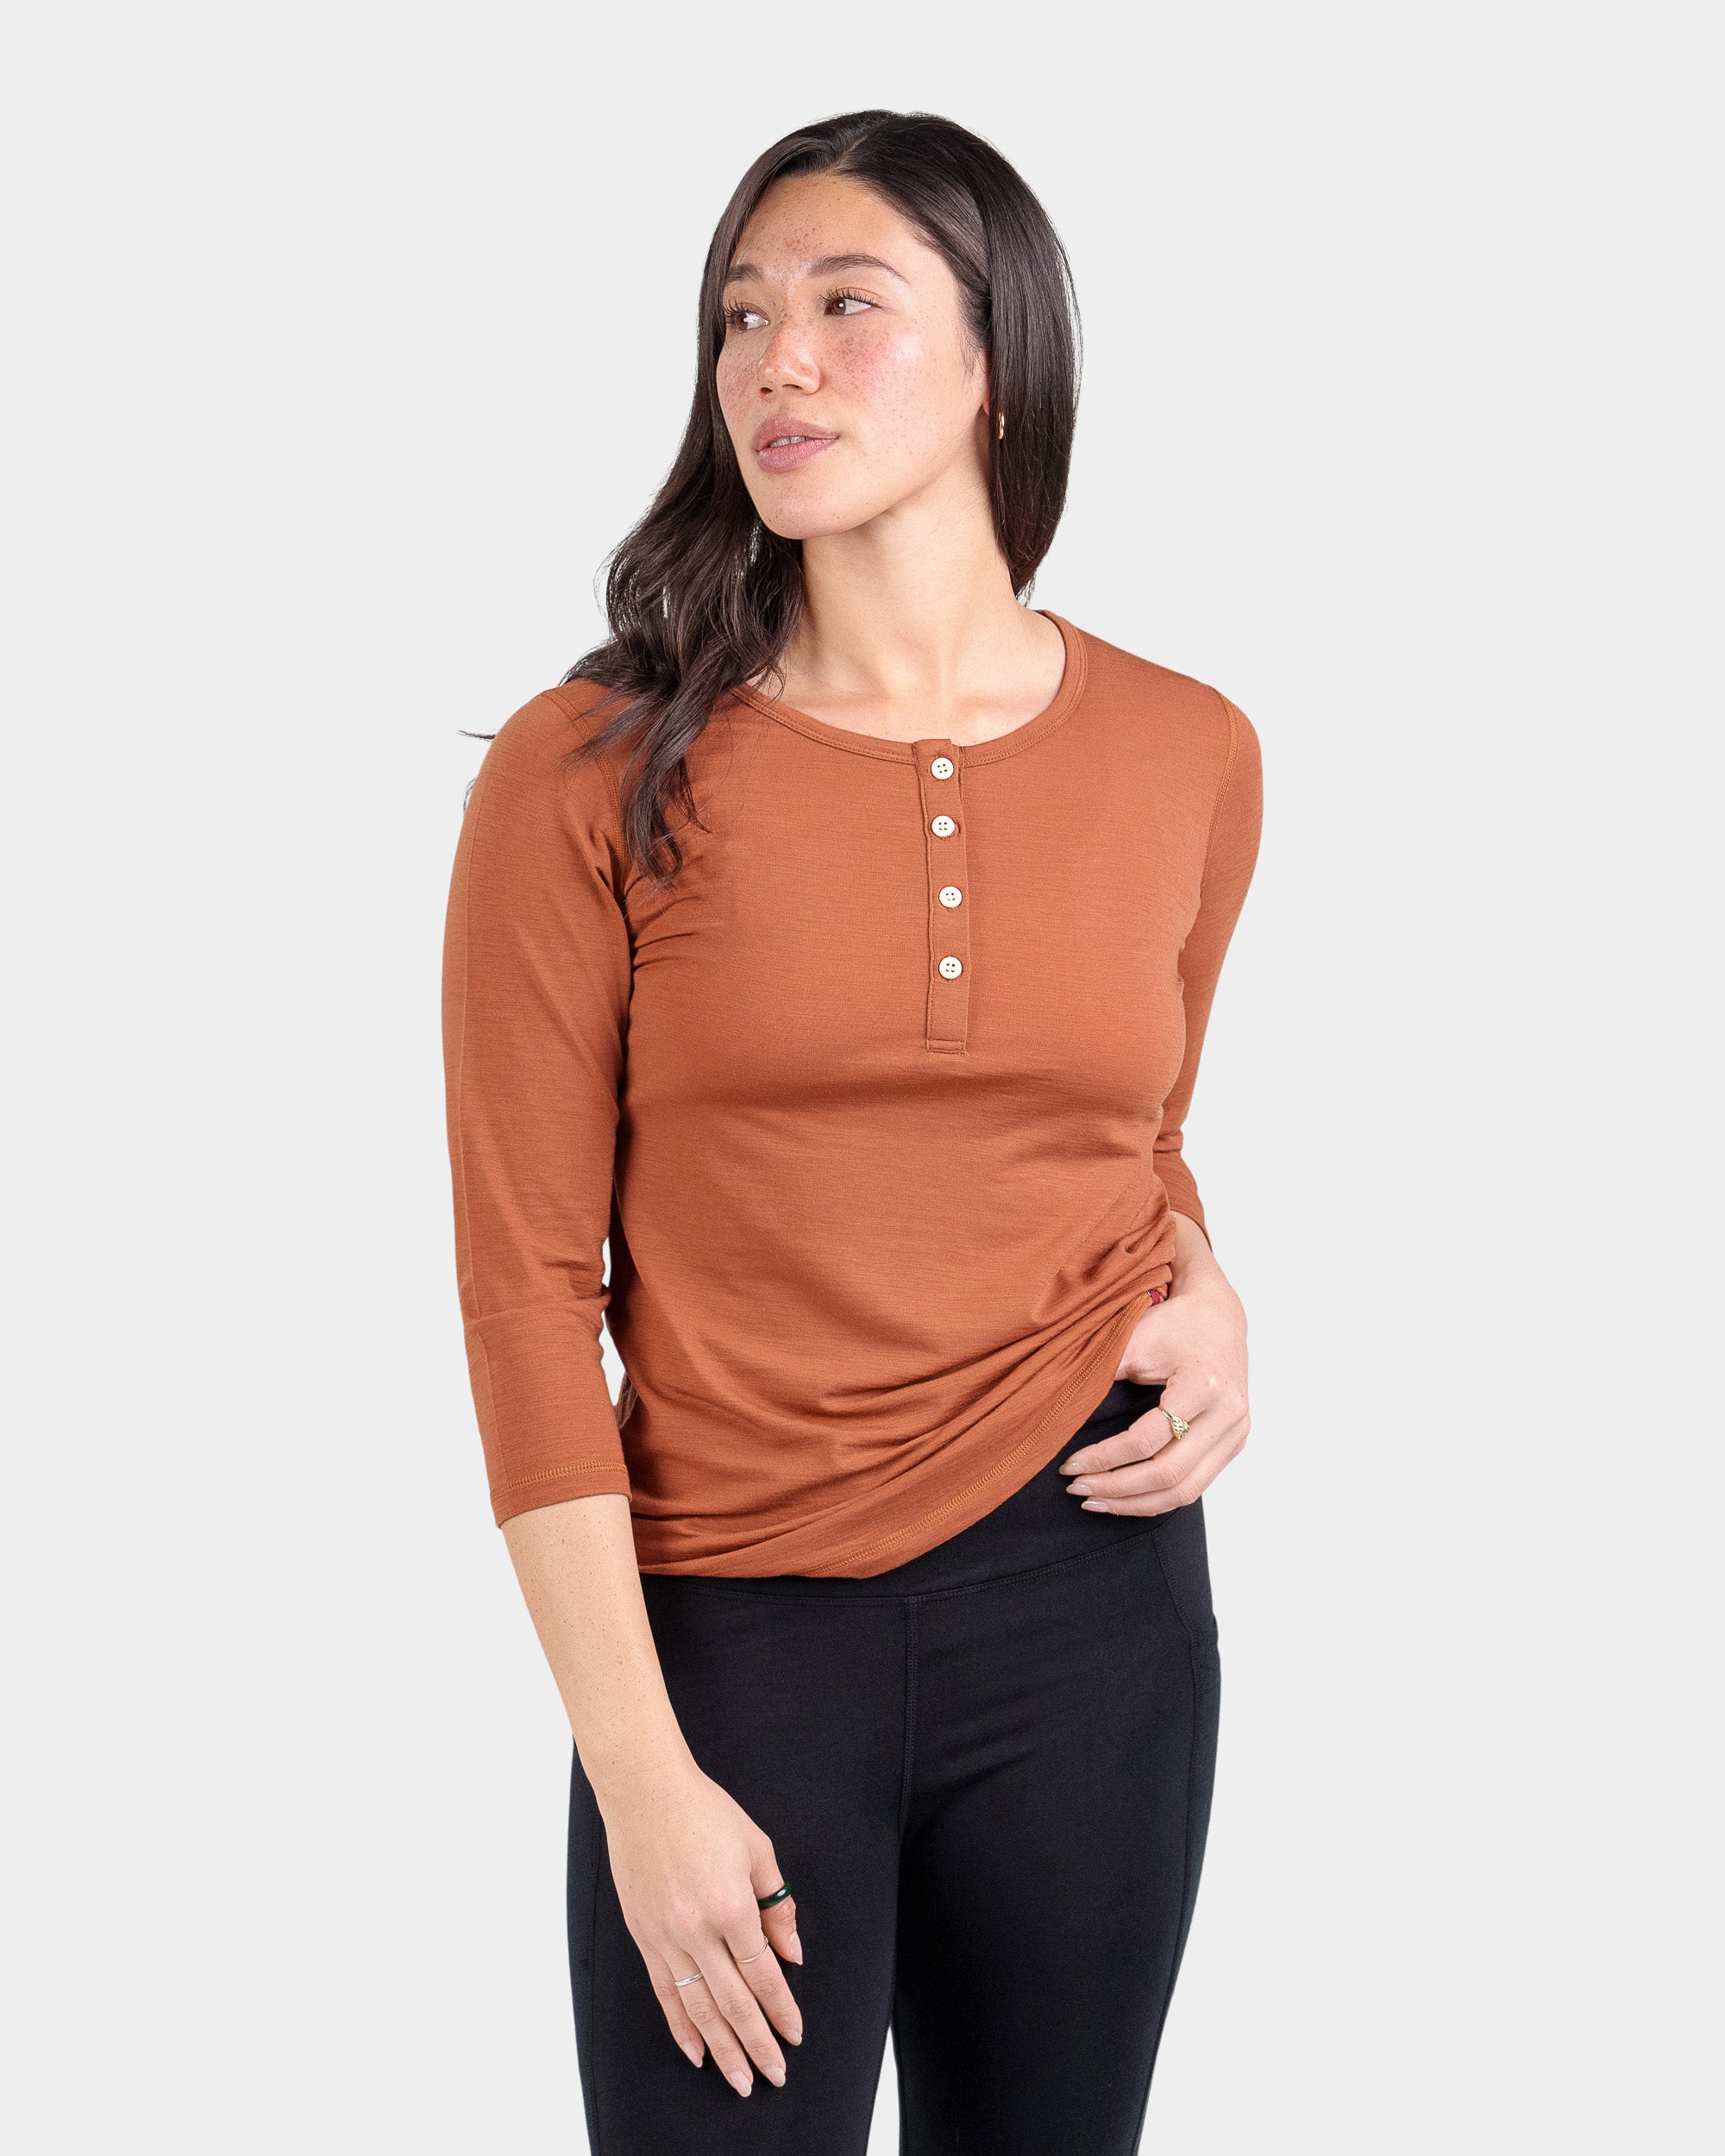  3/4 Length Sleeve Womens Tops,Cheap Clothes for Women